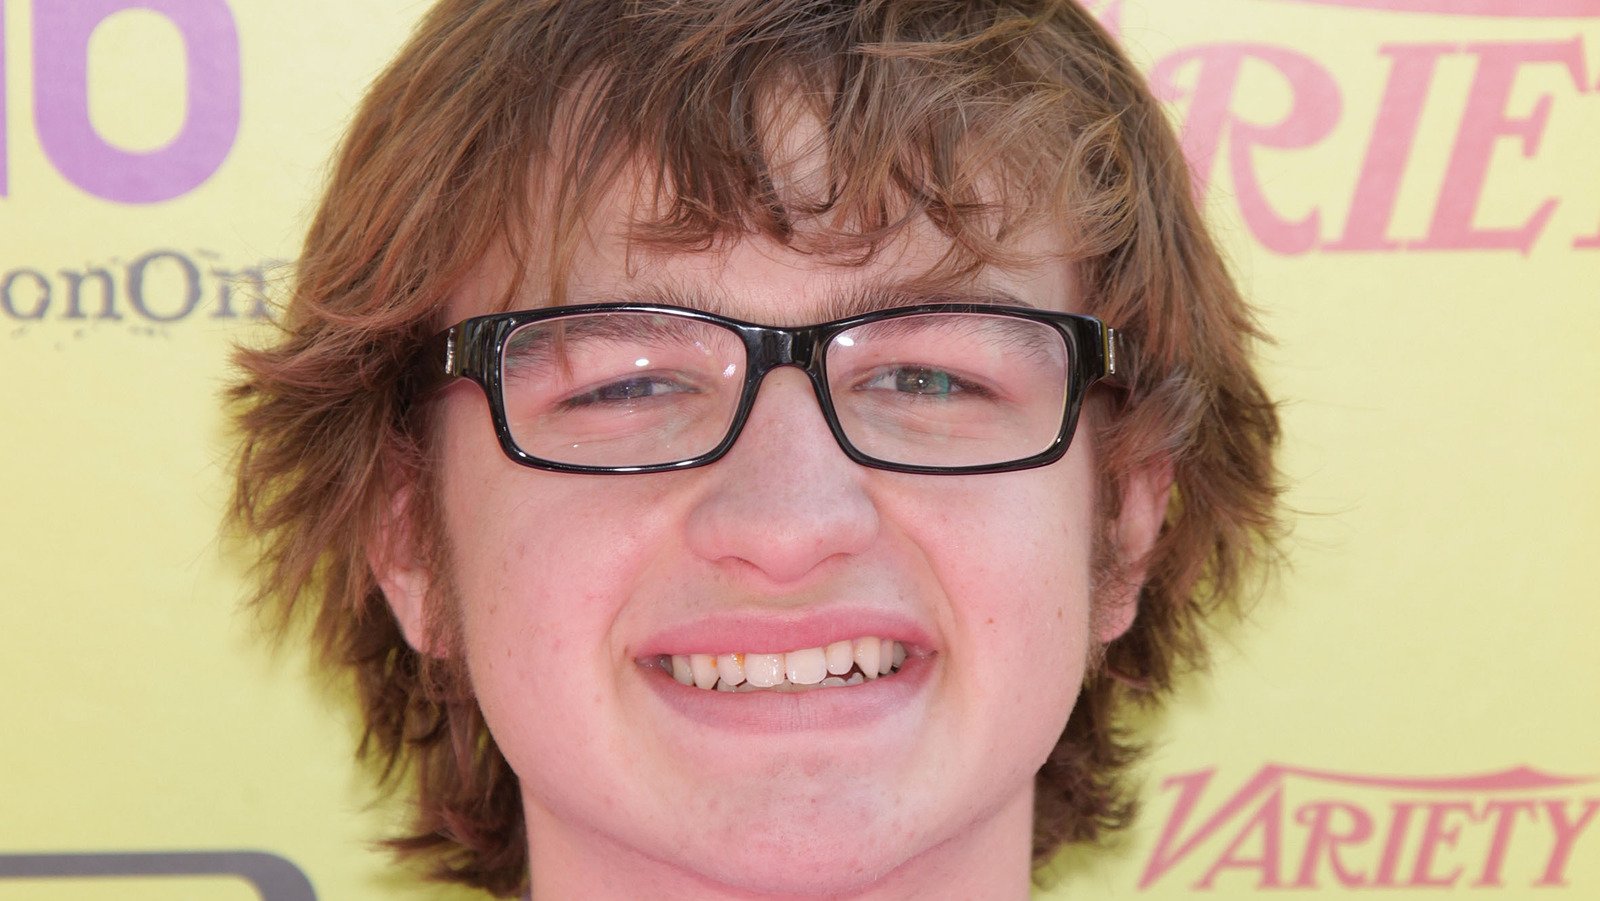 The Surprising Amount Of Money Angus T. Jones Made On Two And A Half Men